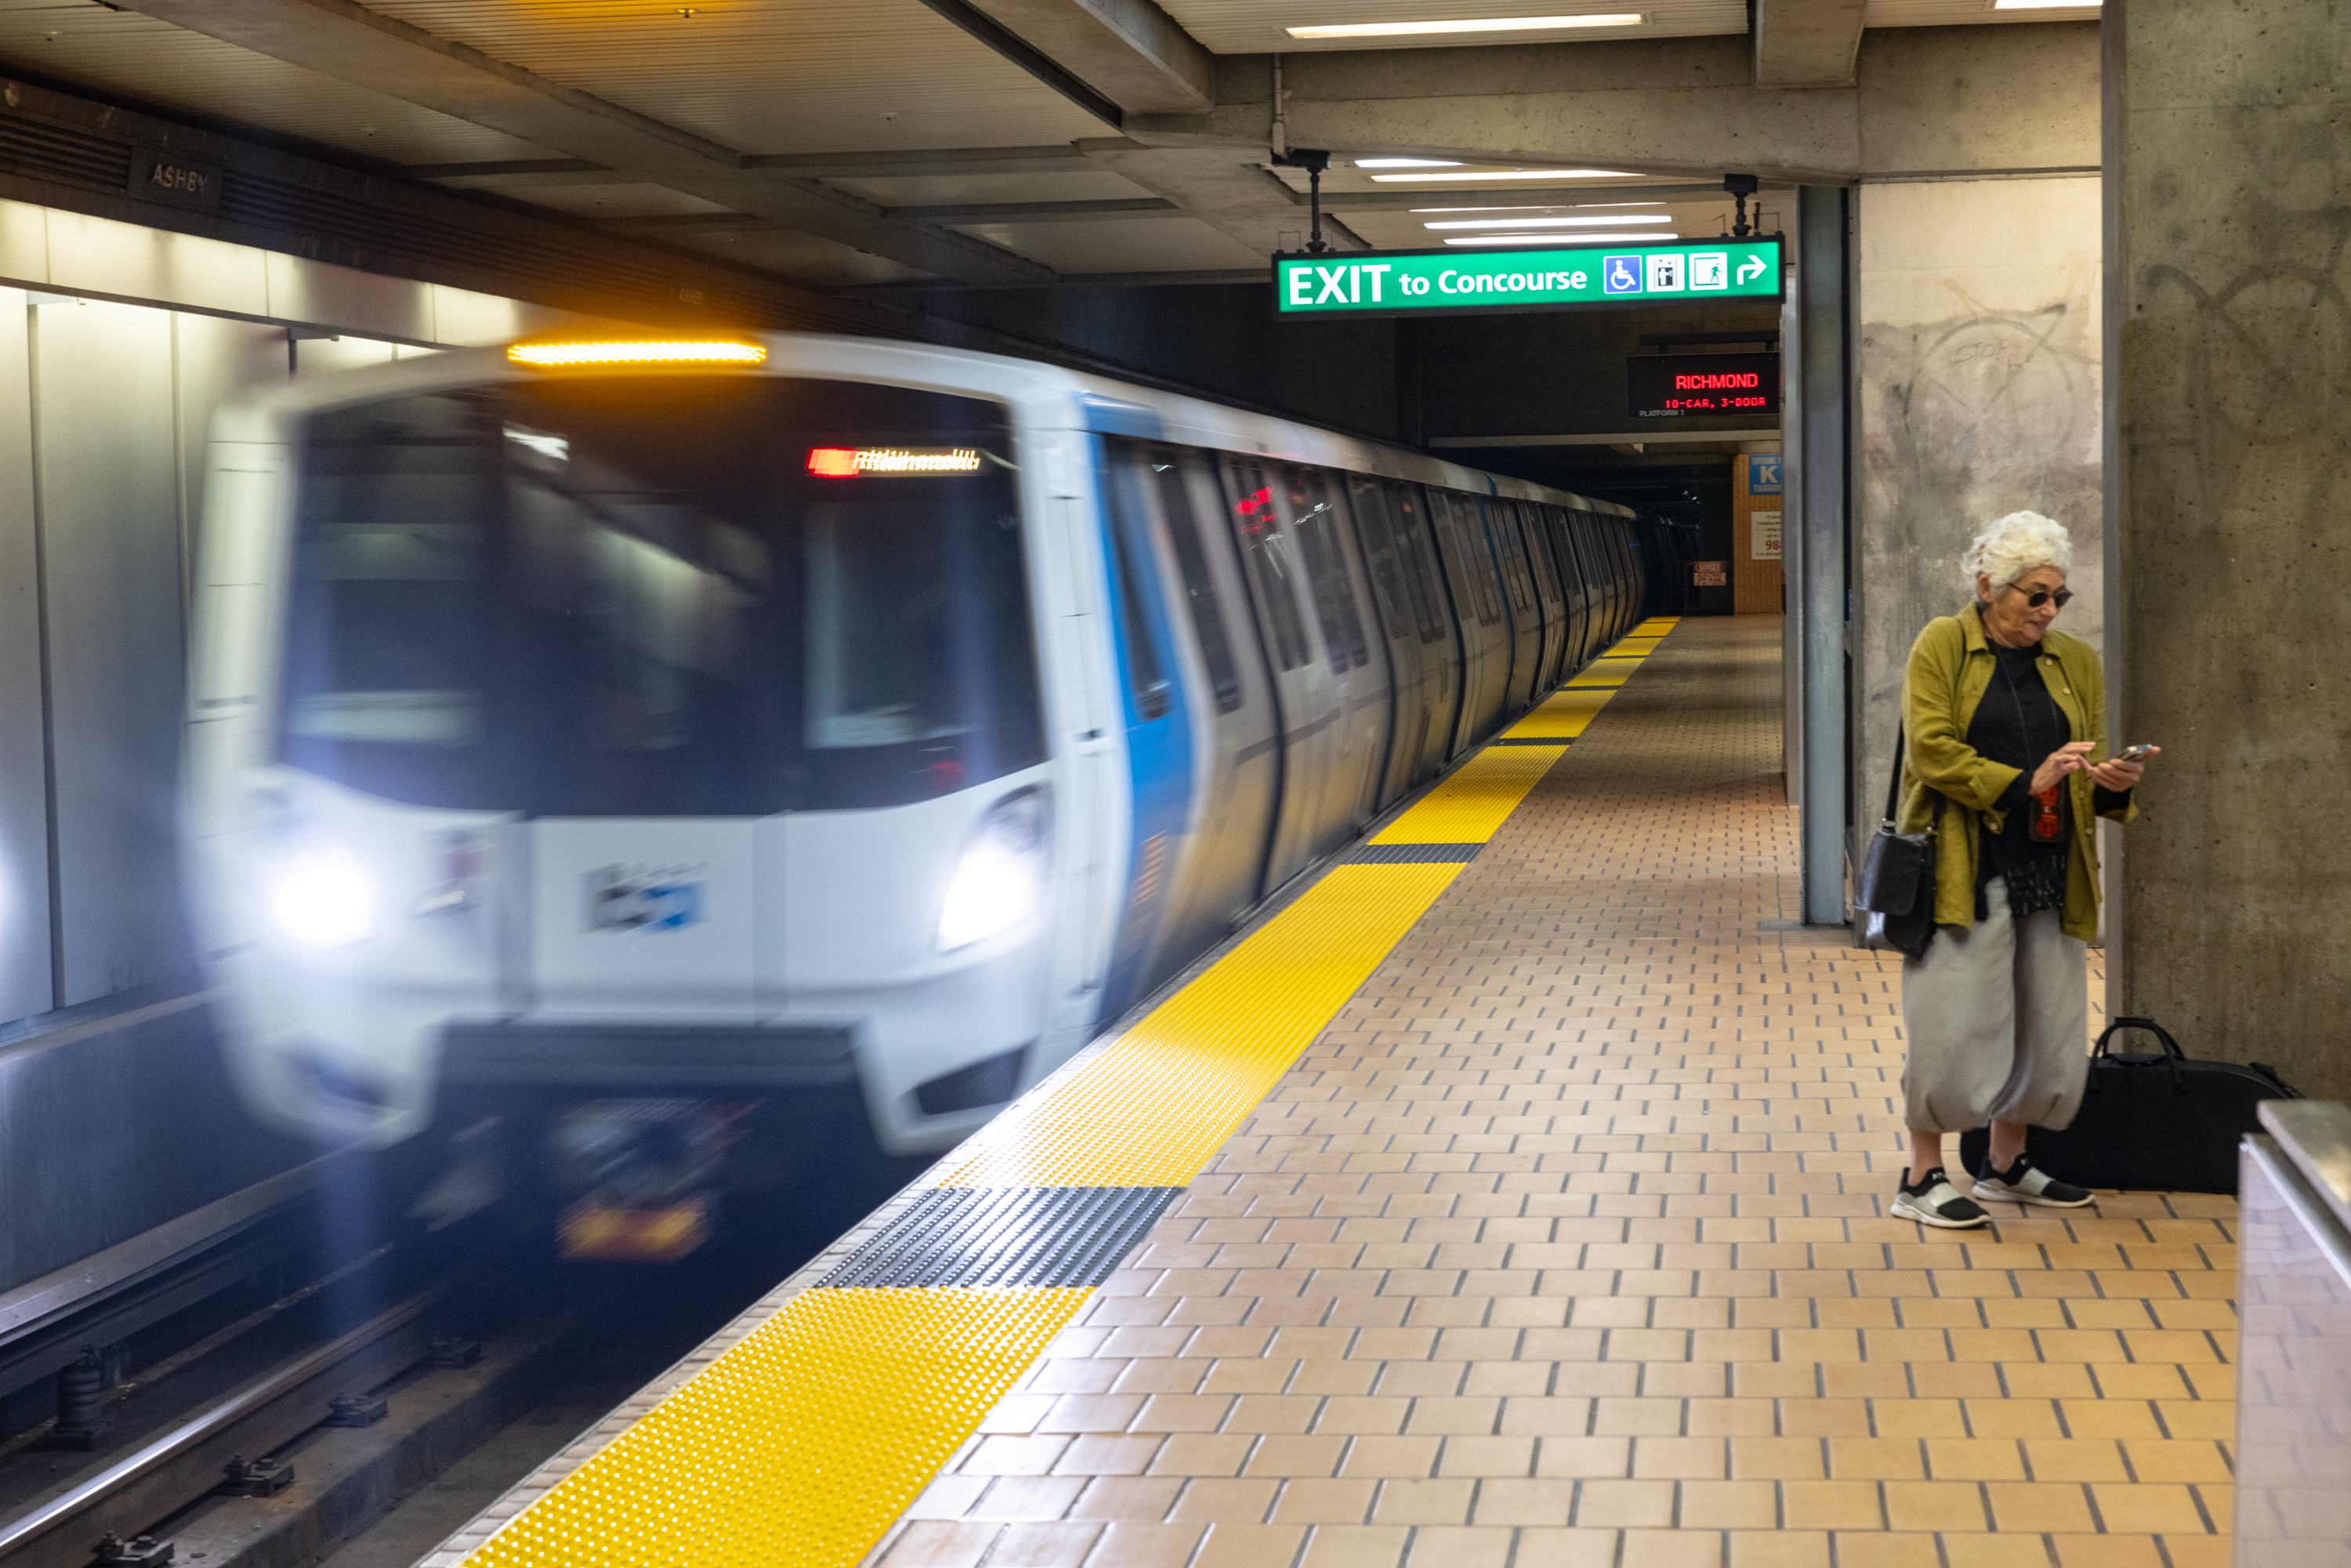 A bart train enters the station